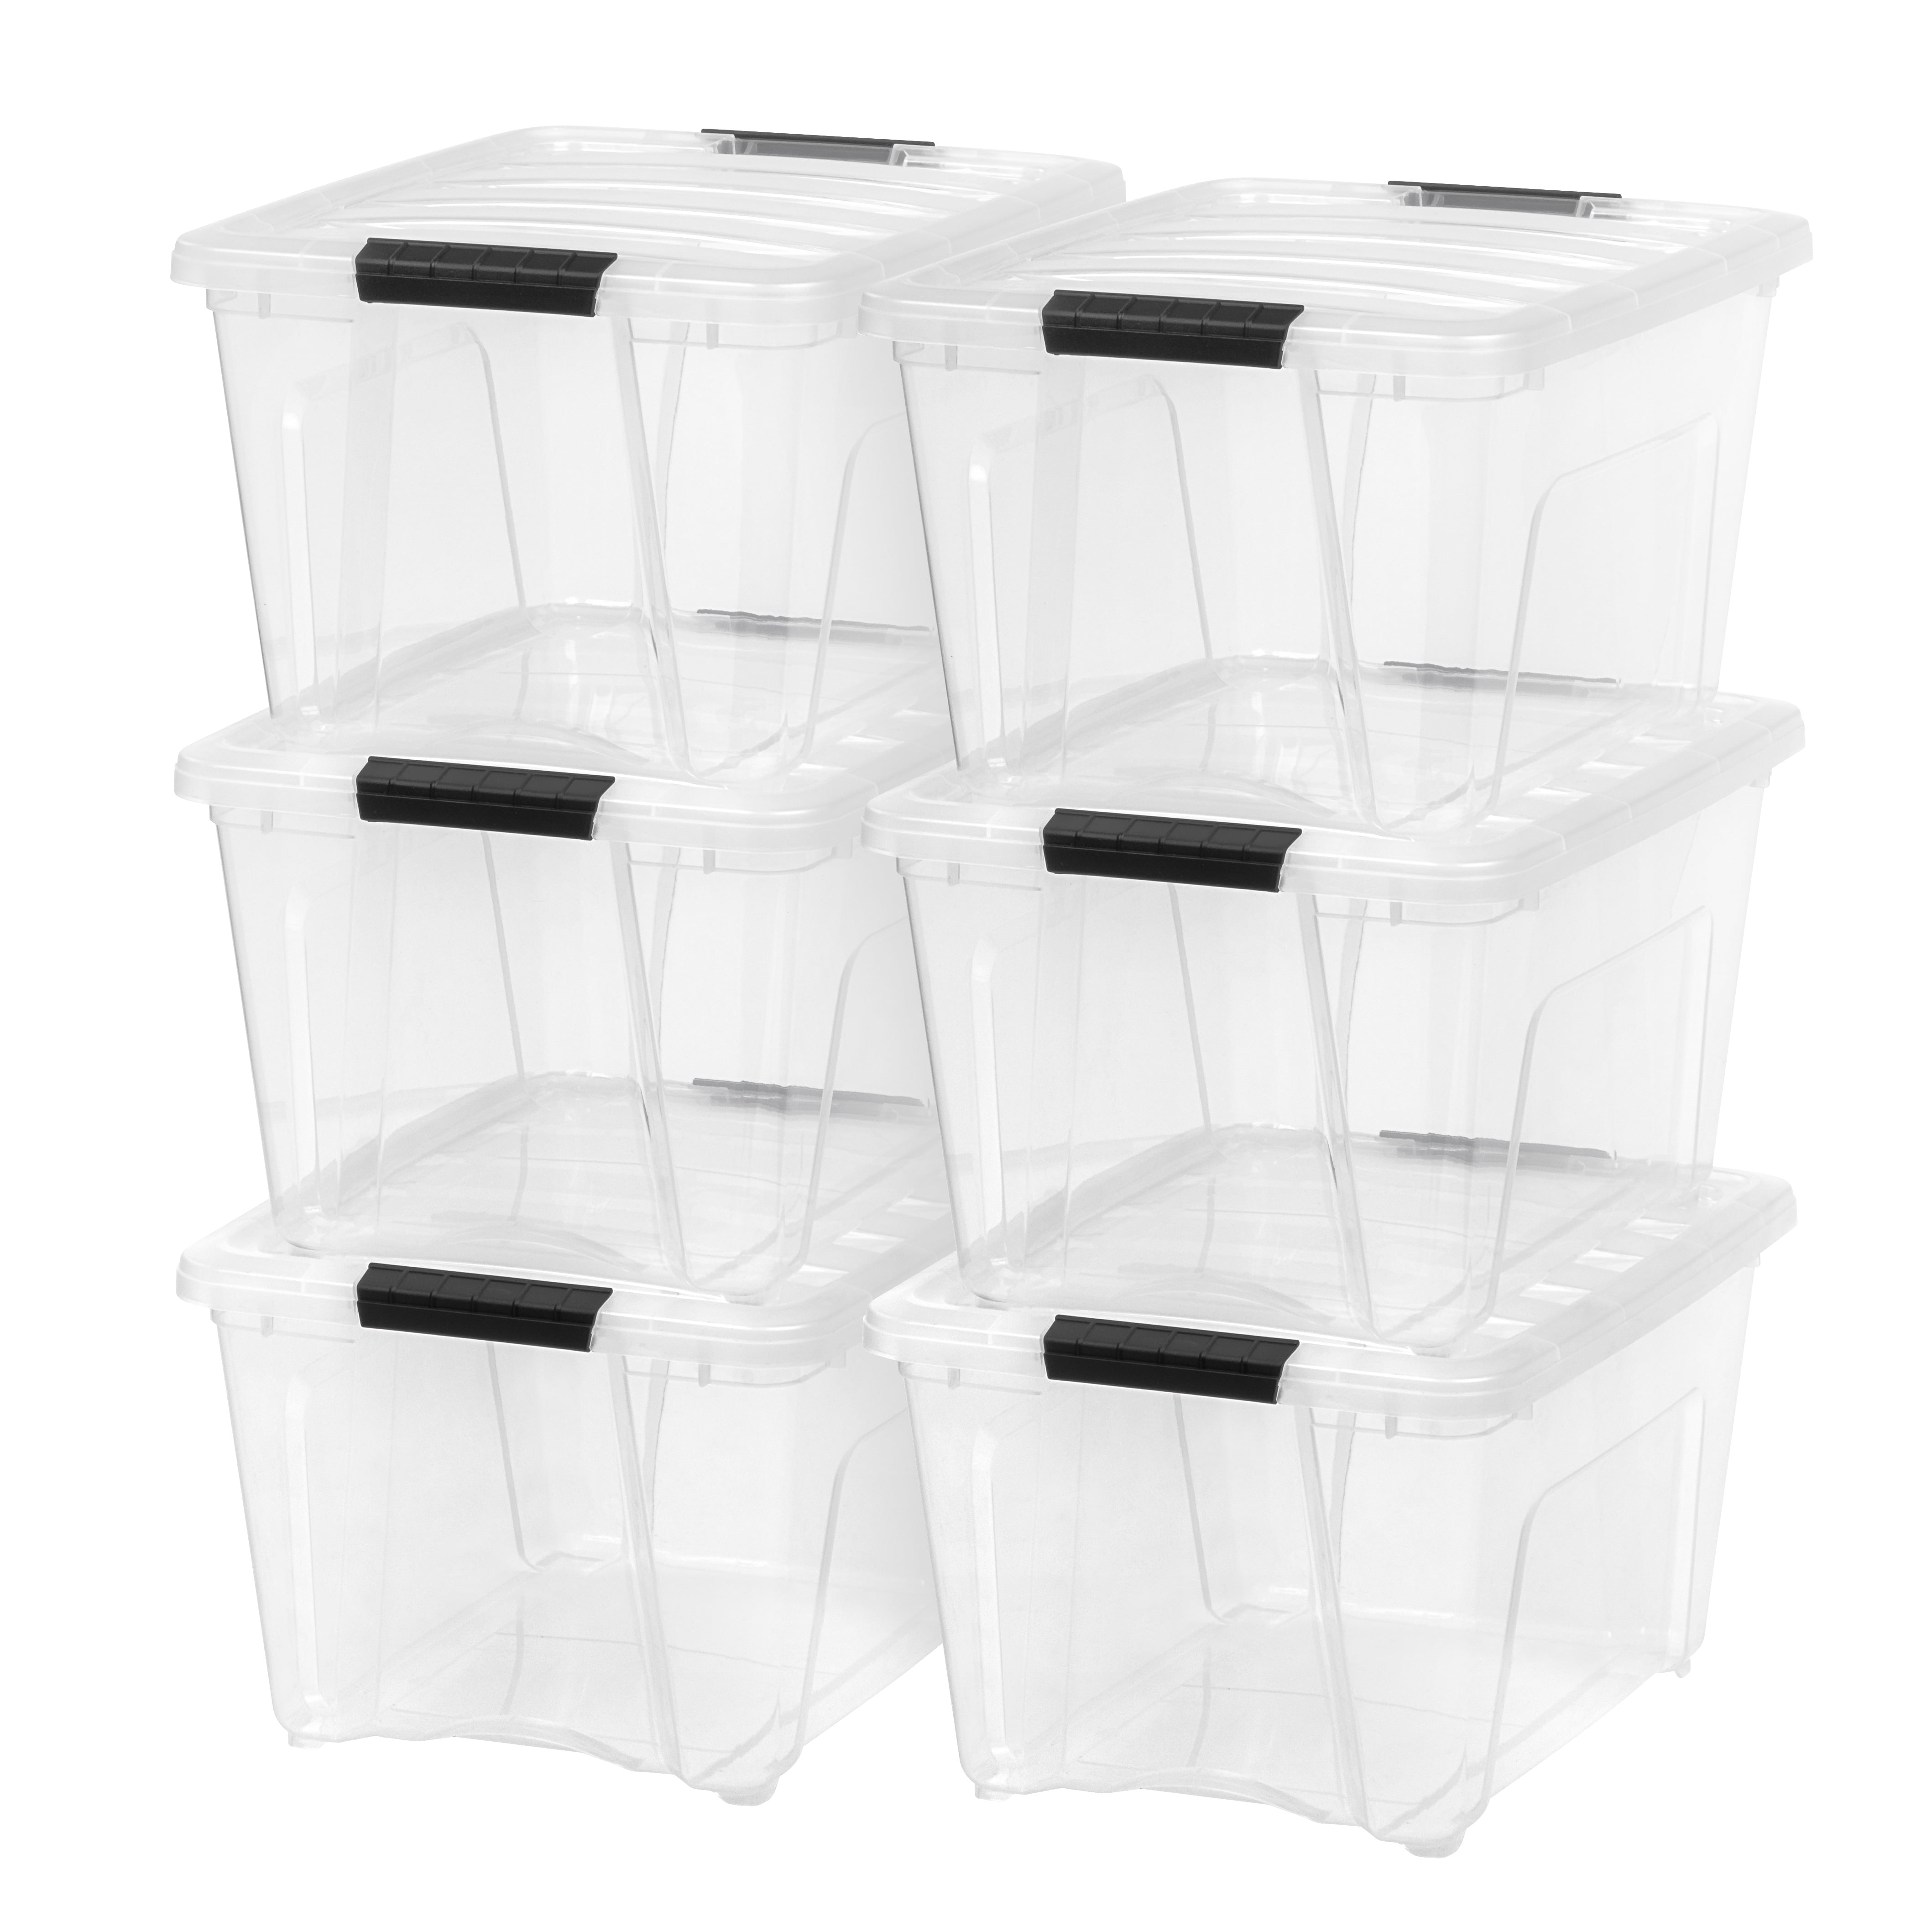  IRIS USA 32 Quart Stackable Plastic Storage Bins with Lids and  Latching Buckles, 6 Pack - Clear, Containers with Lids and Latches, Durable  Nestable Closet, Garage, Totes, Tubs Boxes Organizing : Everything Else